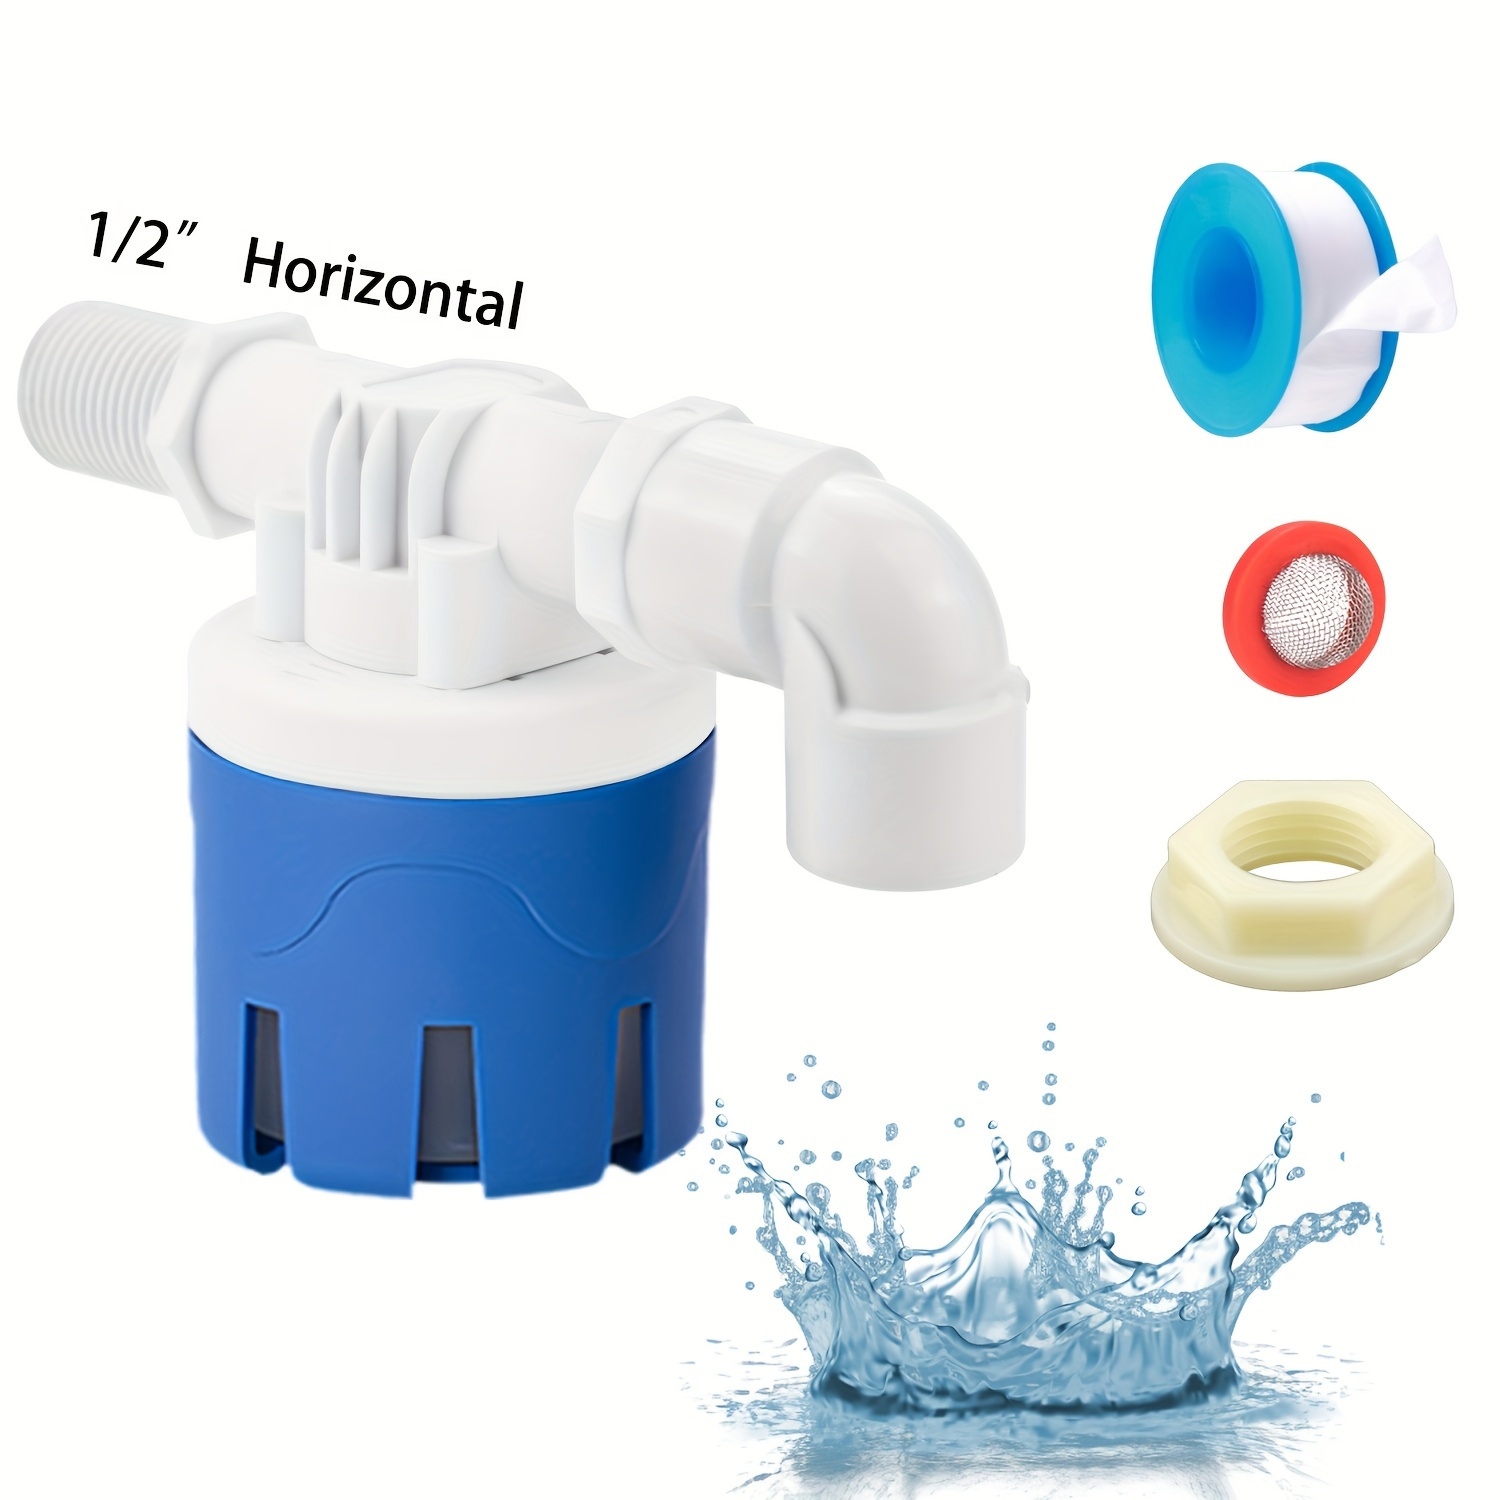 

1/2" 3/4" Water Float Valve Fully Automatic Water Level Control Float Valve No Electricity Needed Auto Fill Shut Off Float Valve Plastic Mini Float Valve For Water Tank Water Tower Pool